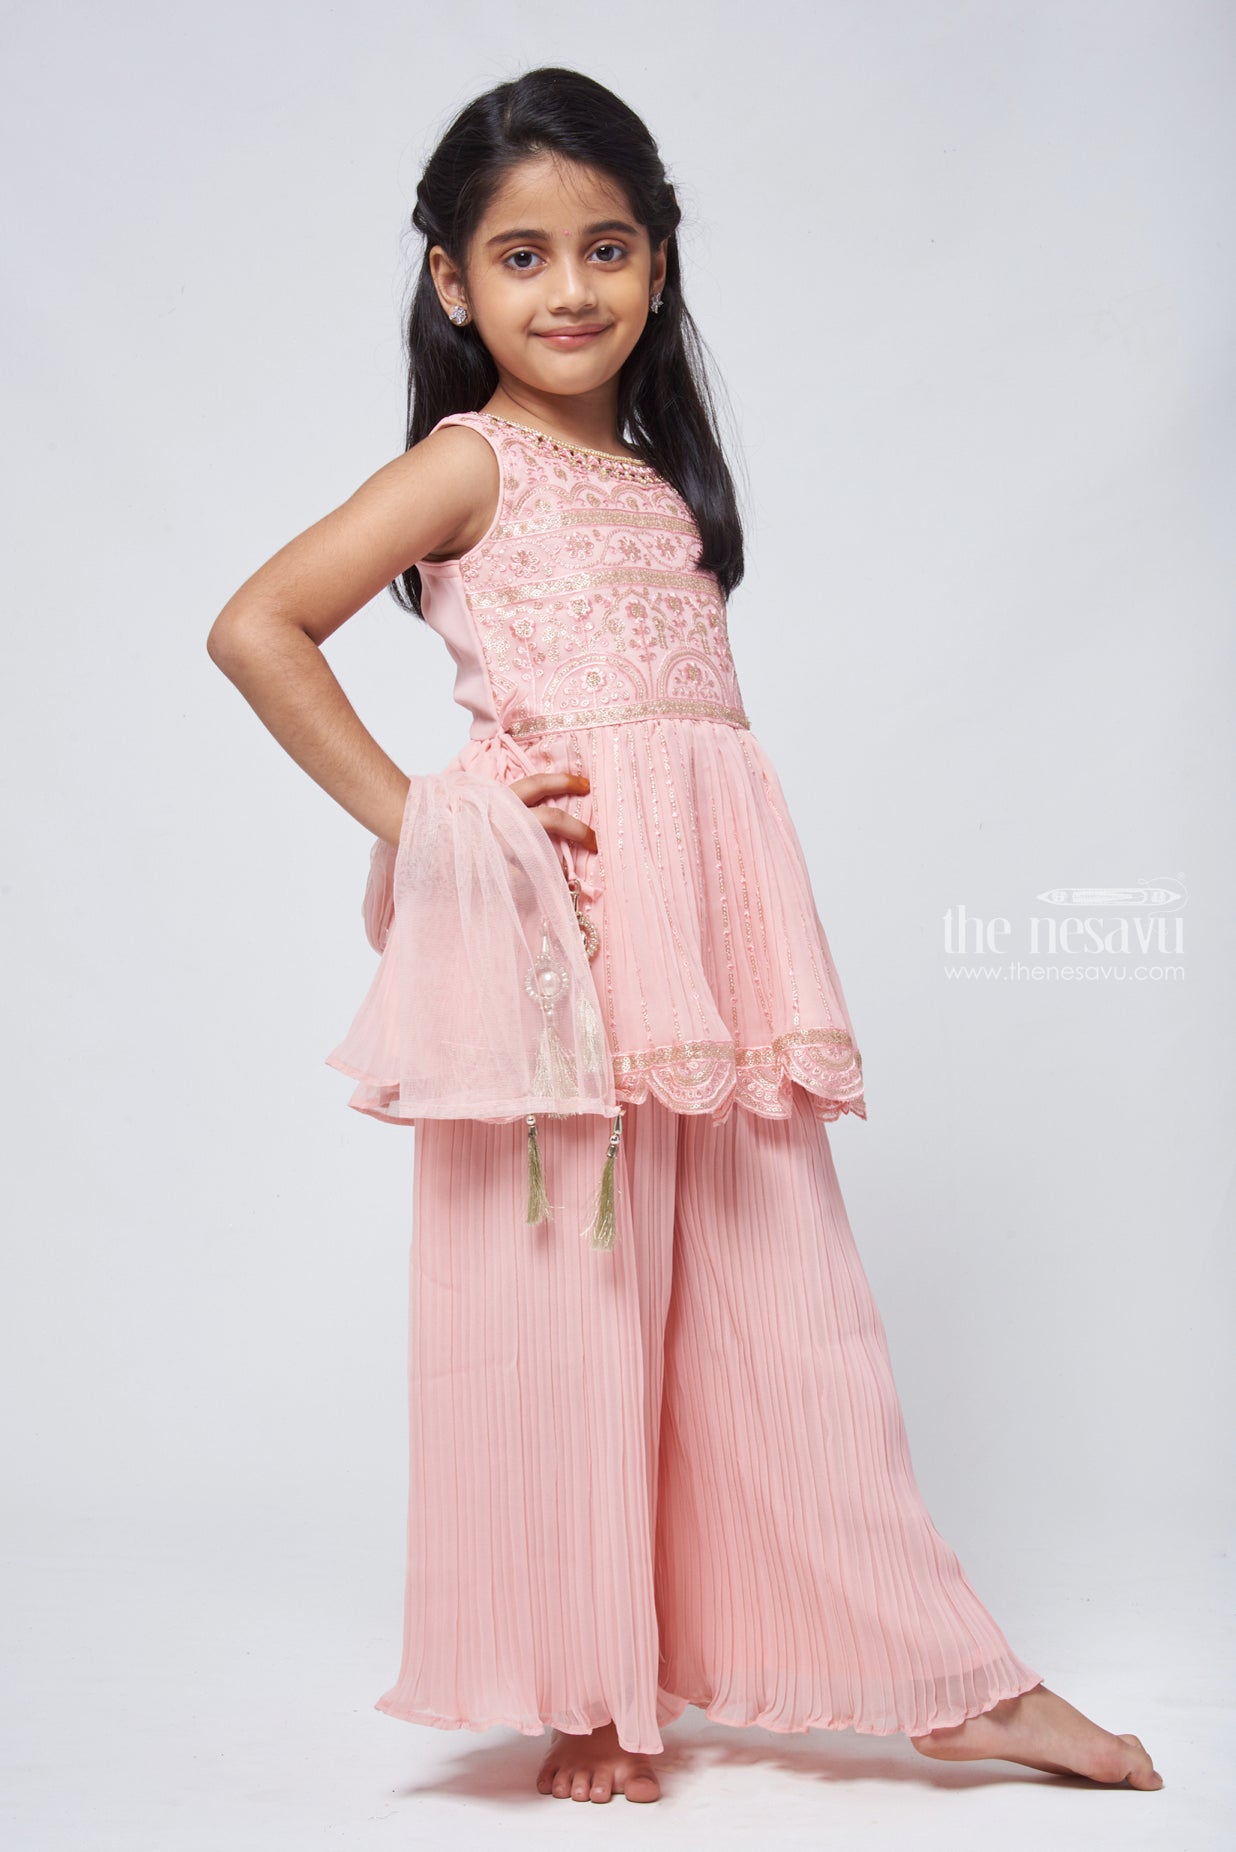 Designer Shiny Pink Flower Girls Dresses For Weddings 2023 Bling Satin  Pretty Formal Girls Gowns Cute Satin Puffy Tulle Pageant Dress New Luxury  Birthday Party Gown From Weddingpromgirl, $78.59 | DHgate.Com